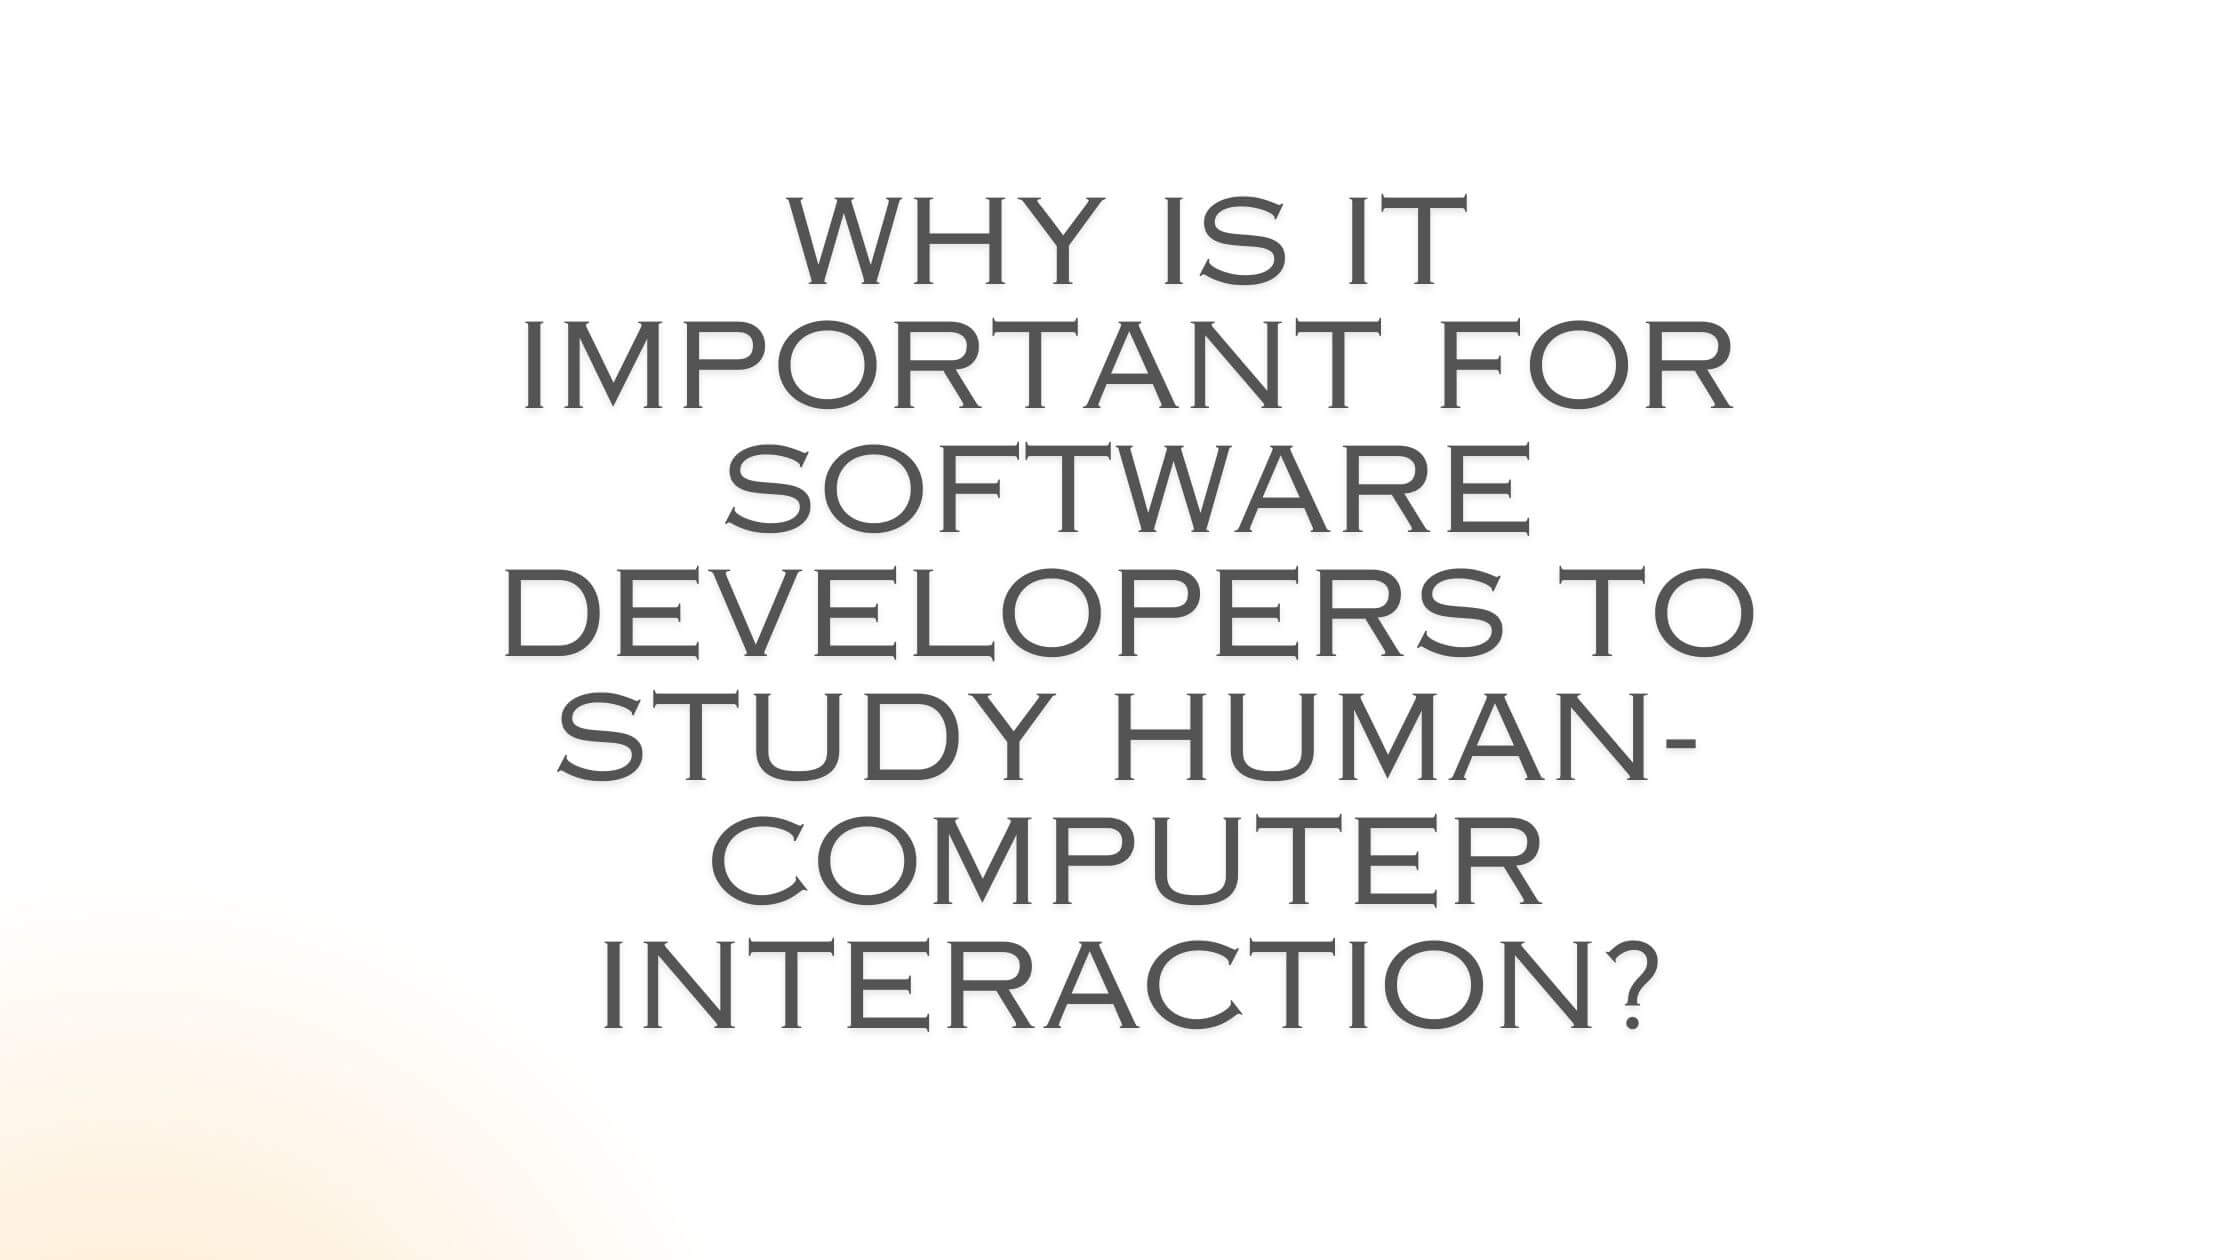 Why Is It Important for Software Developers to Study Human-Computer Interaction